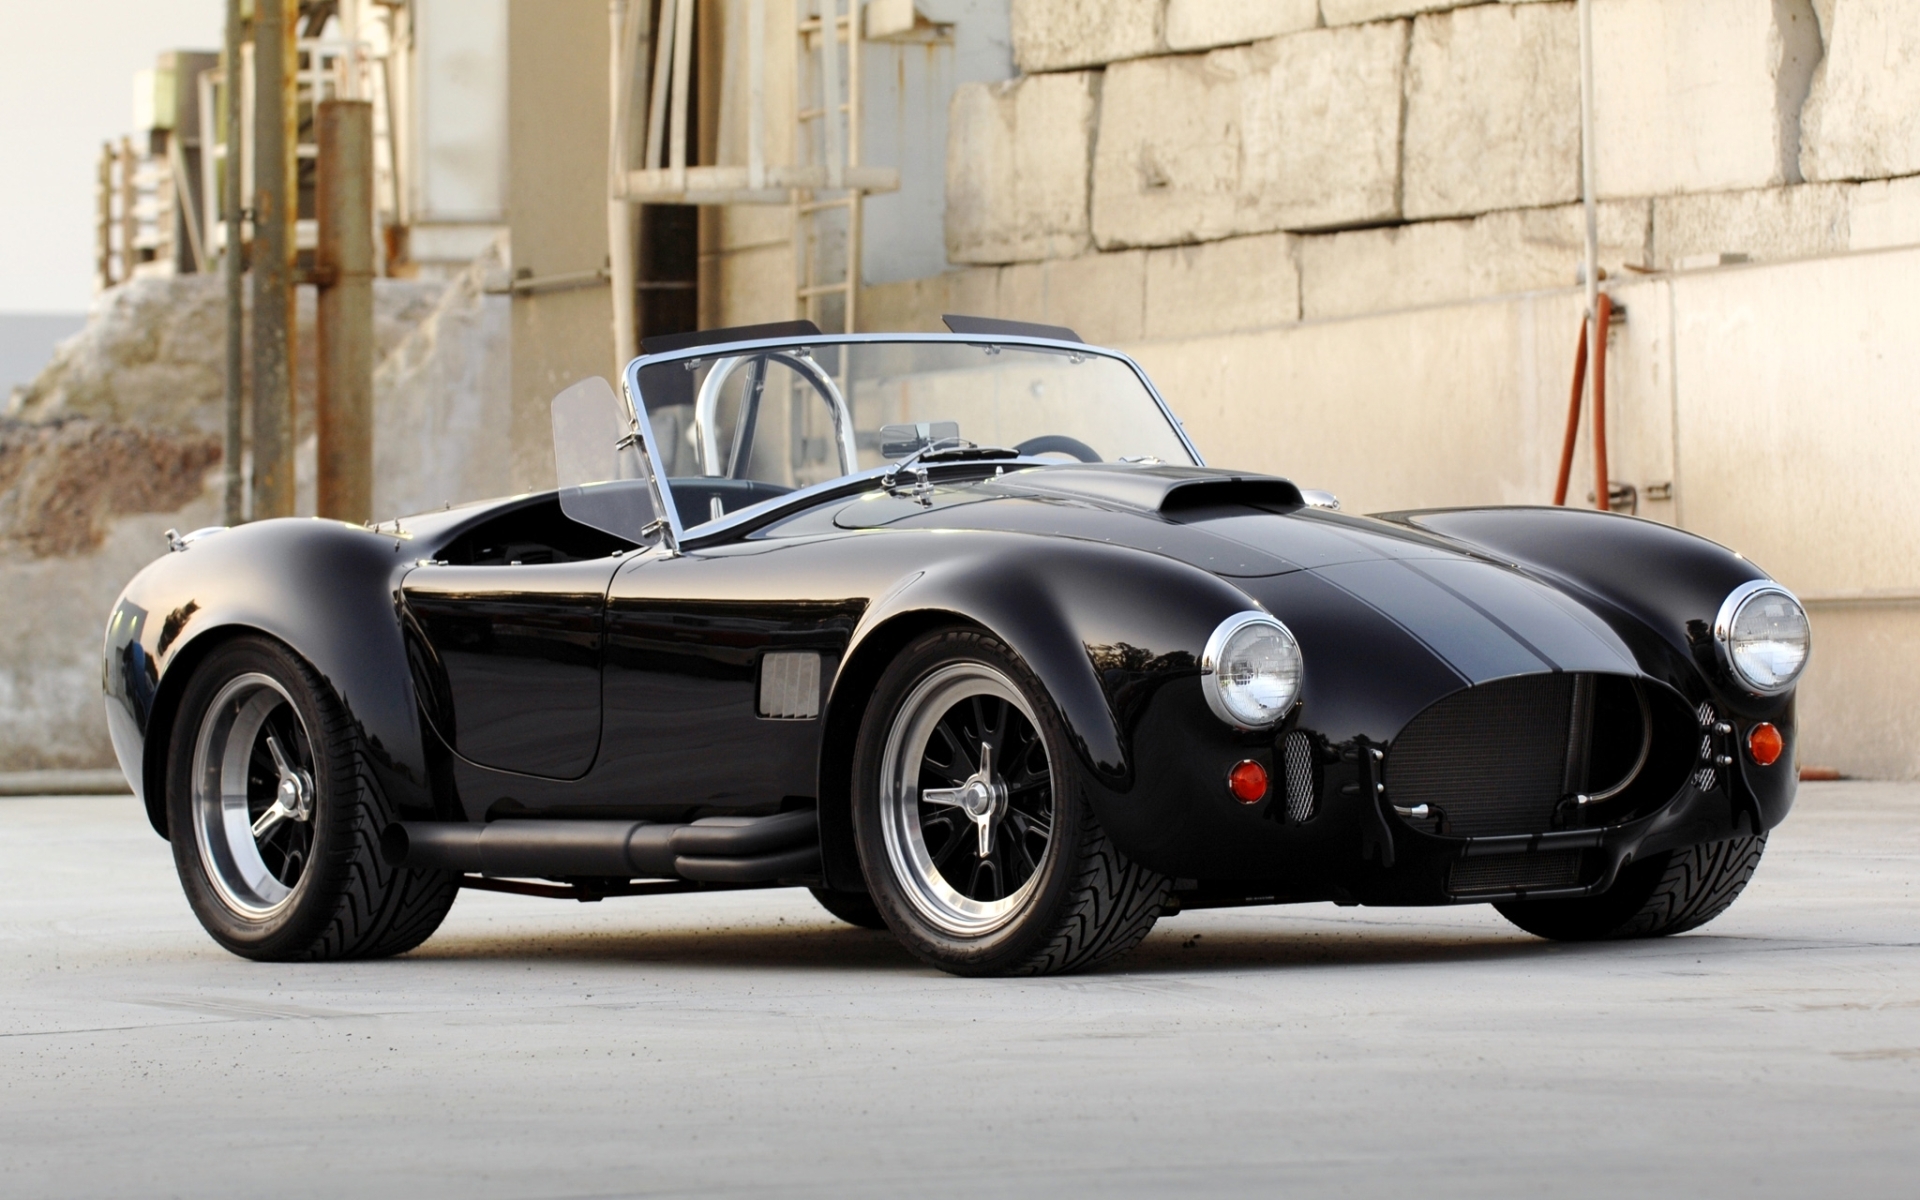 Ac Shelby Cobra Muscle Cars Classic Hot Rods Wallpaper Background